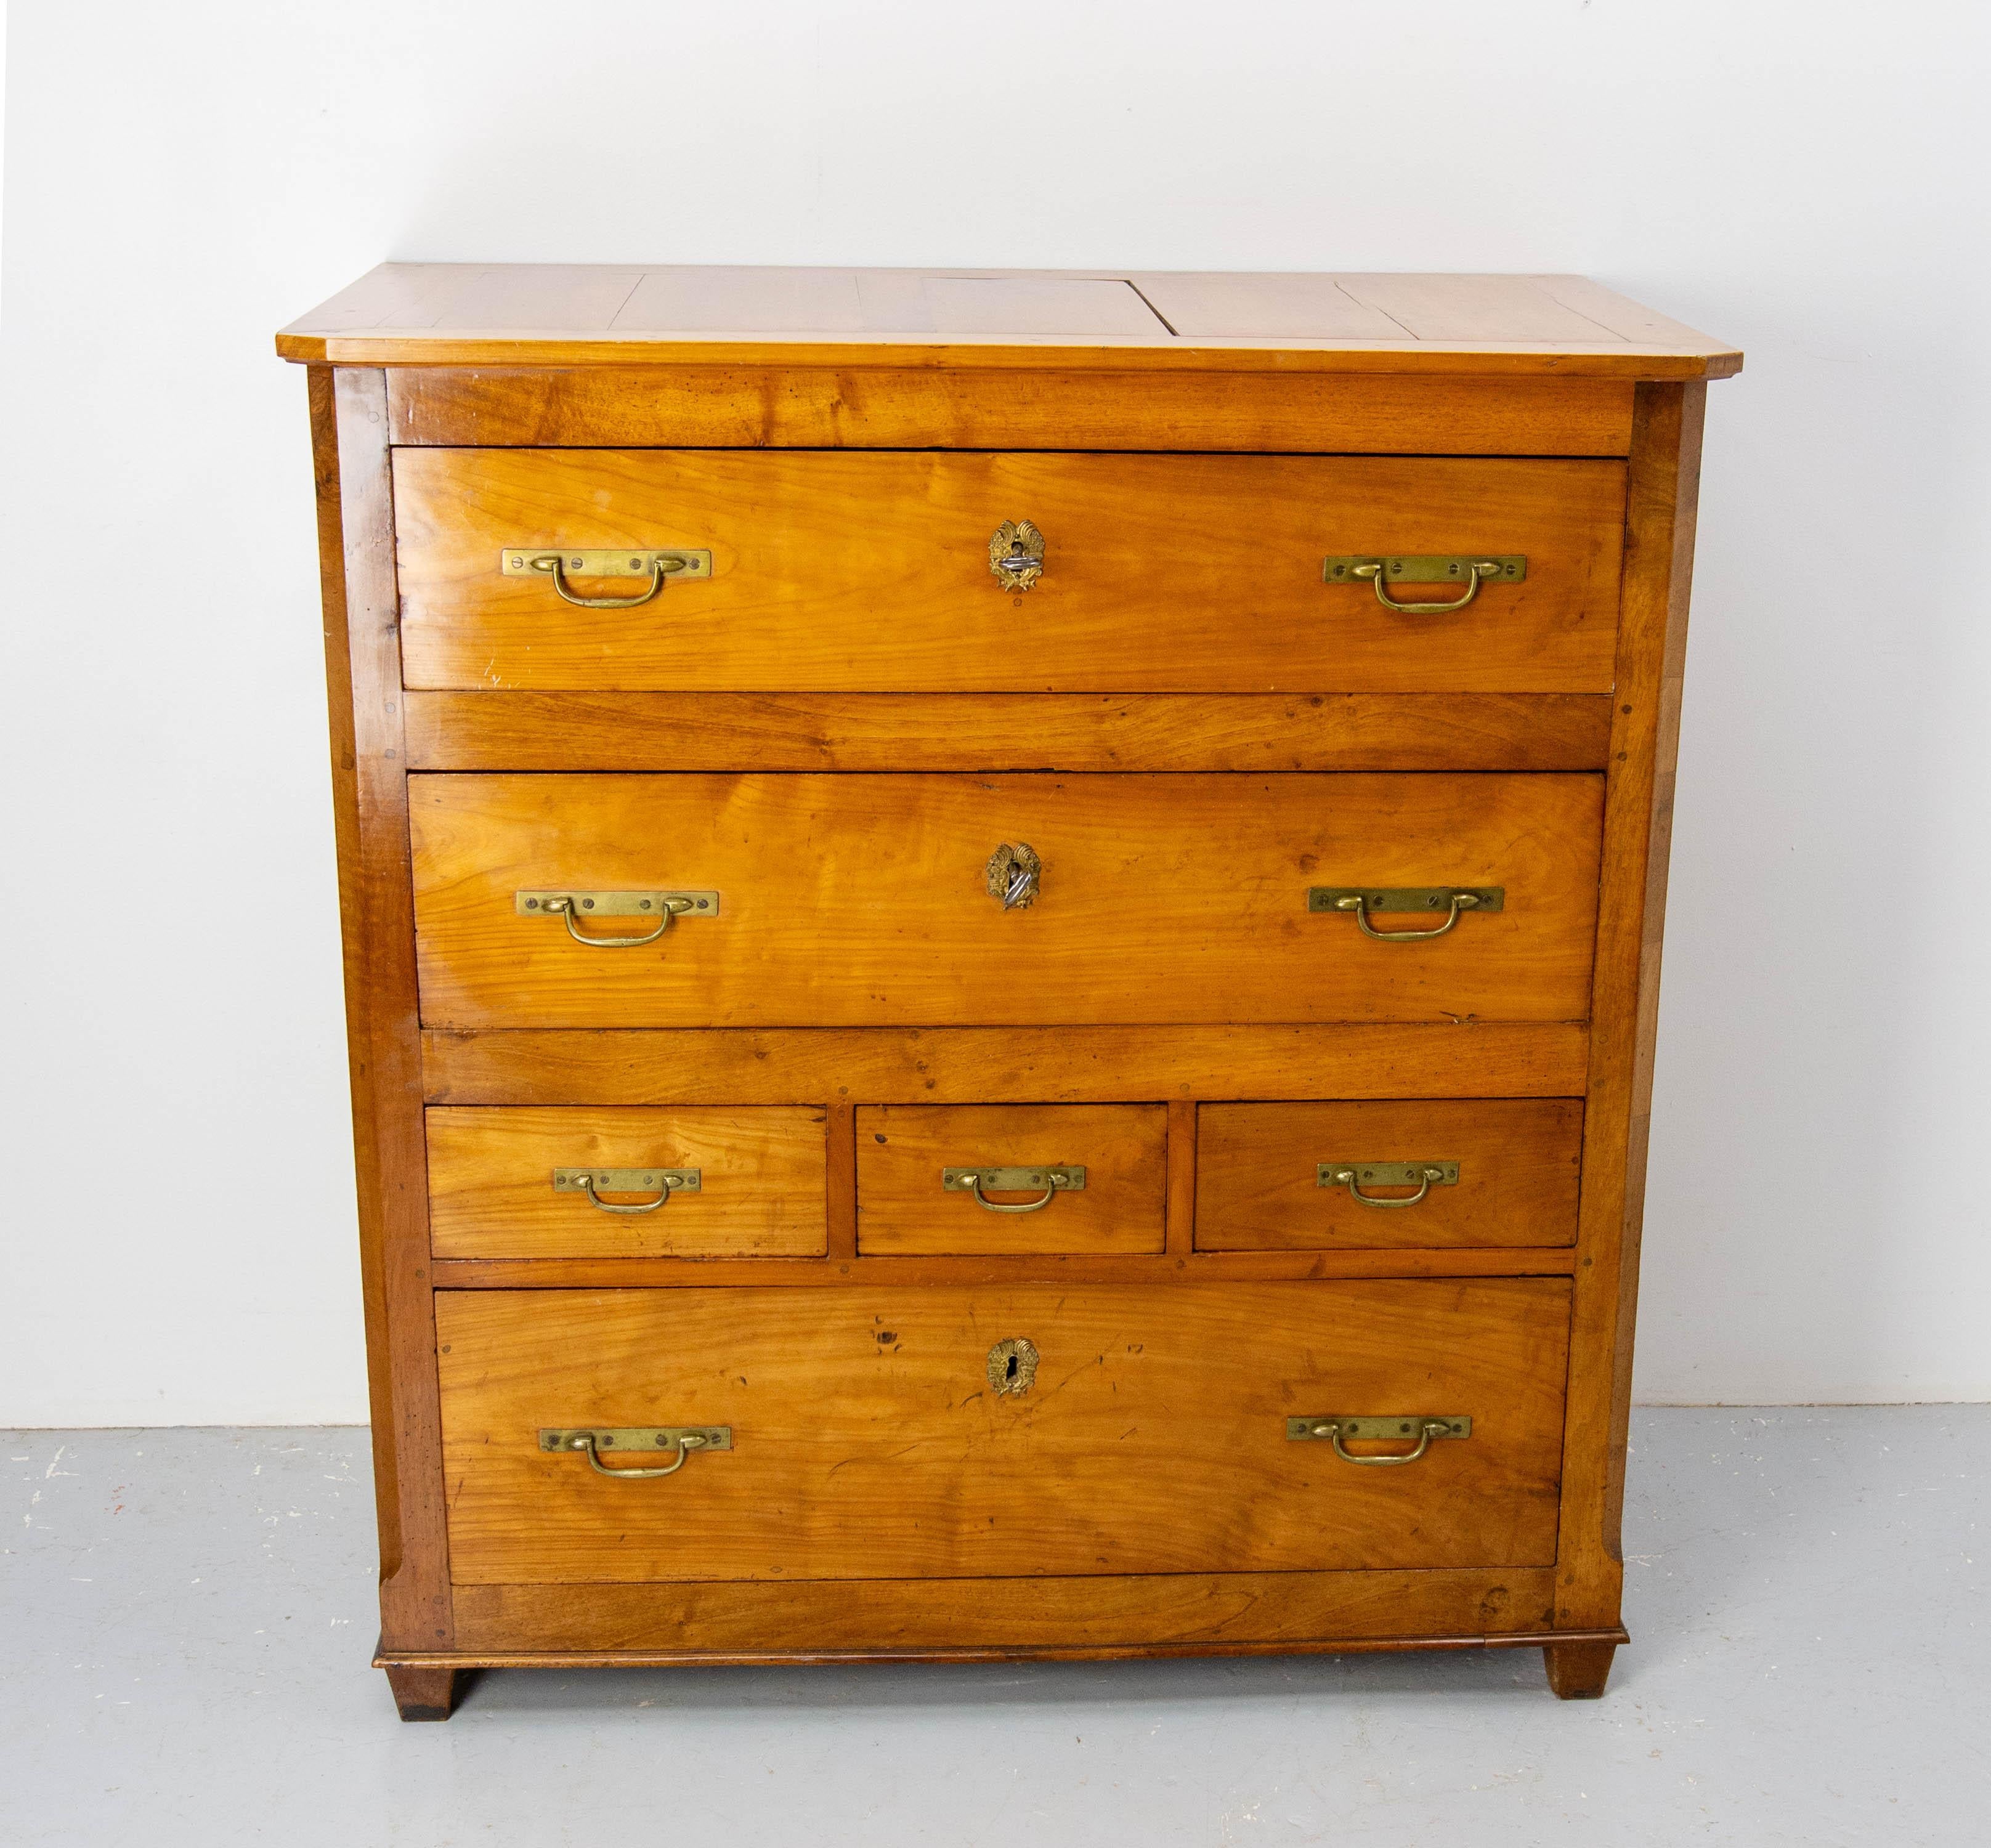 Antique buffet escritoire secretaire cabinet, made circa 1900
Desk very convenient to store and close in a room with several functions
A good quality centre work and writing table: the second top drawer of the cabinet opens to become the writing